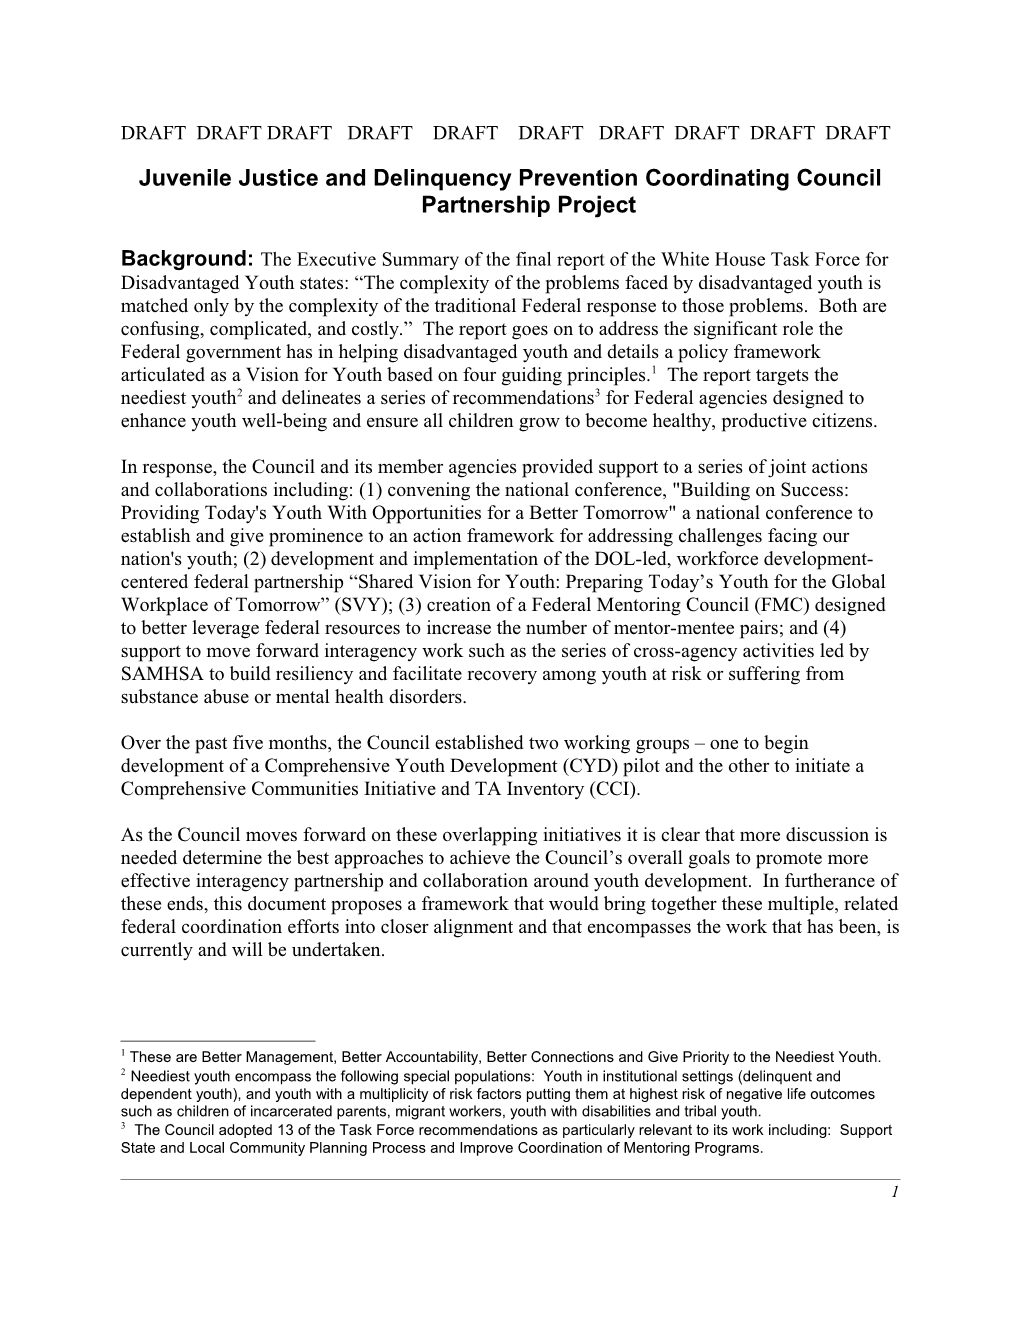 Juvenile Justice and Delinquency Prevention Coordinating Council